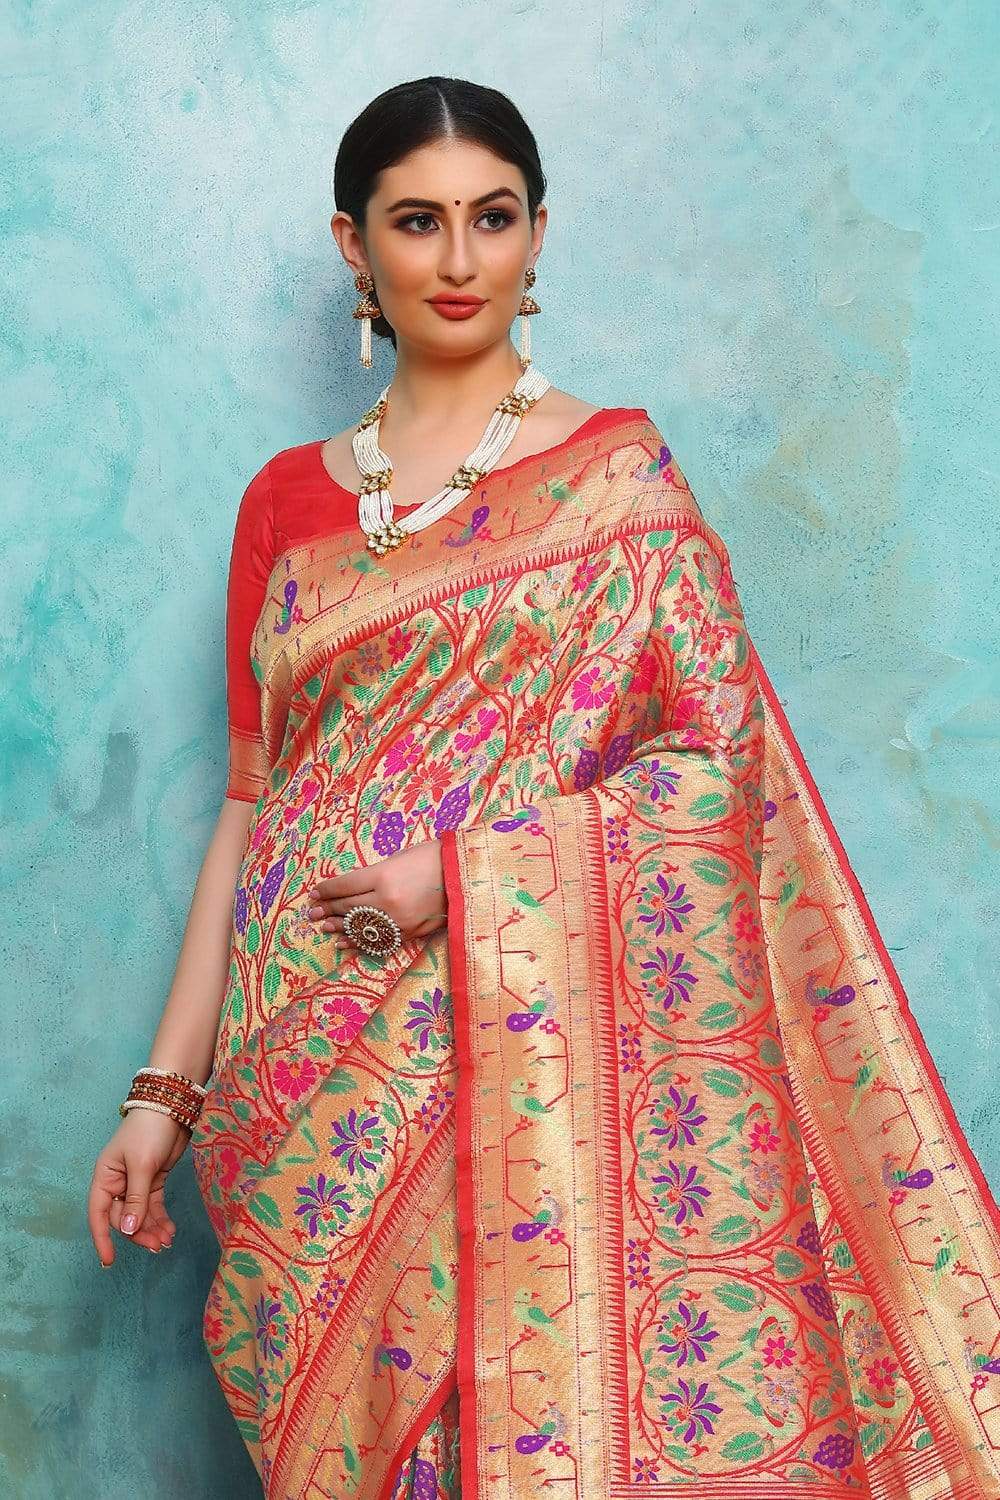 Which are the best places to buy Paithani sarees? - Quora